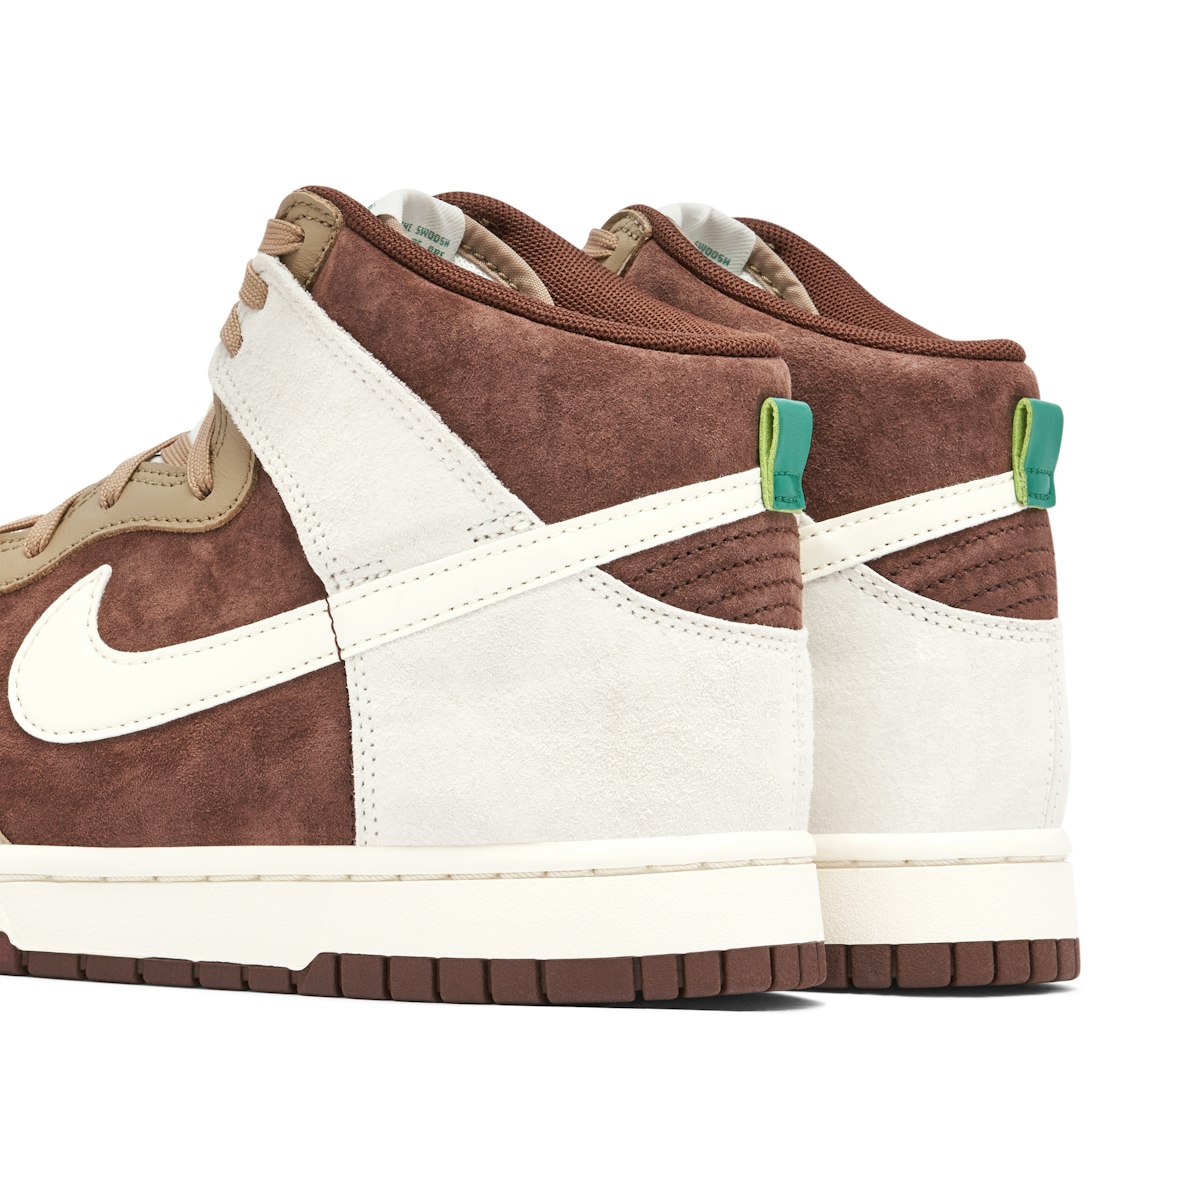 Chocolate' Nike Dunk Highs Are Coming Soon